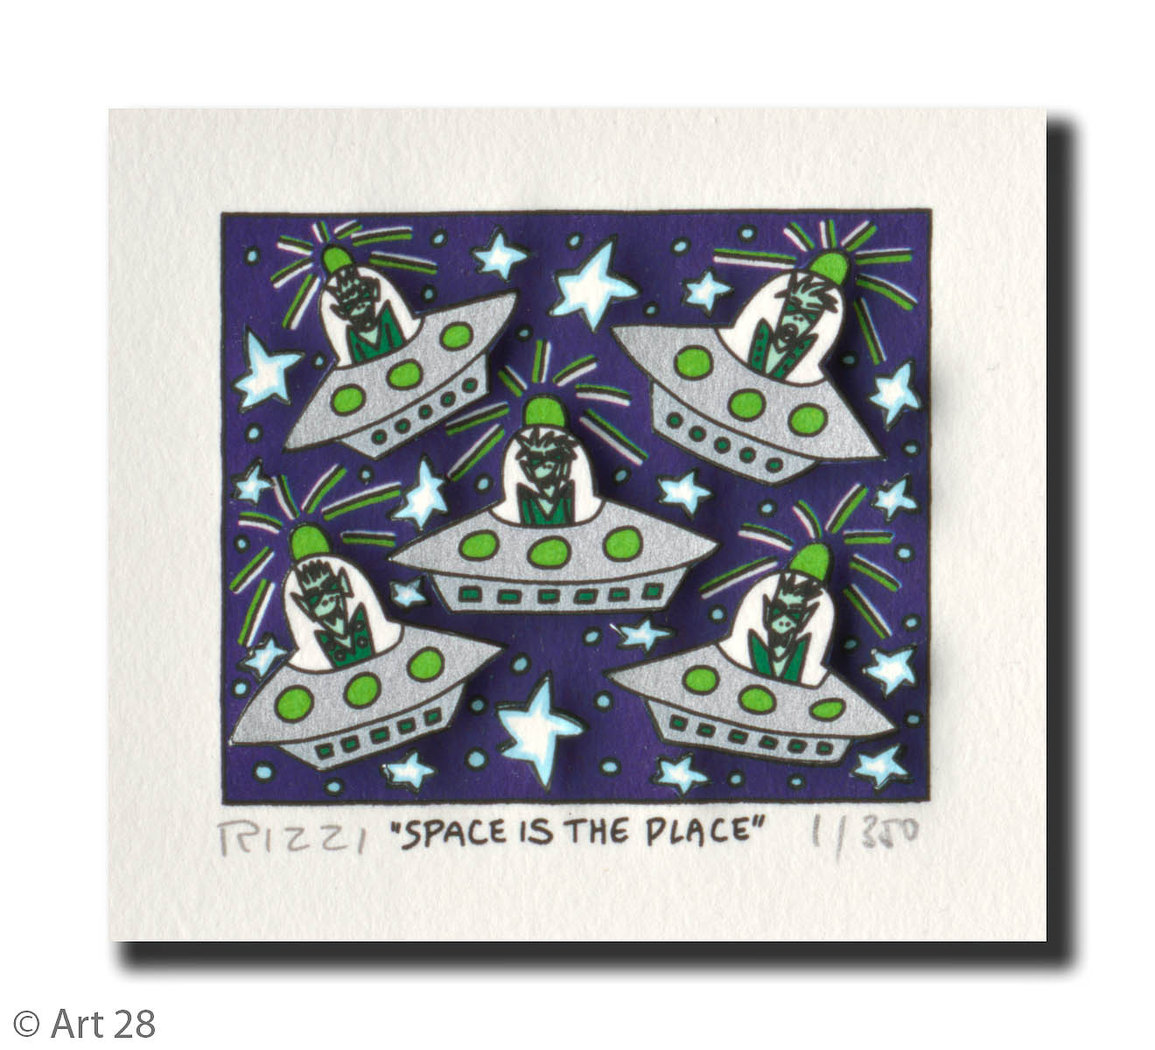 James Rizzi - SPACE IS THE PLACE